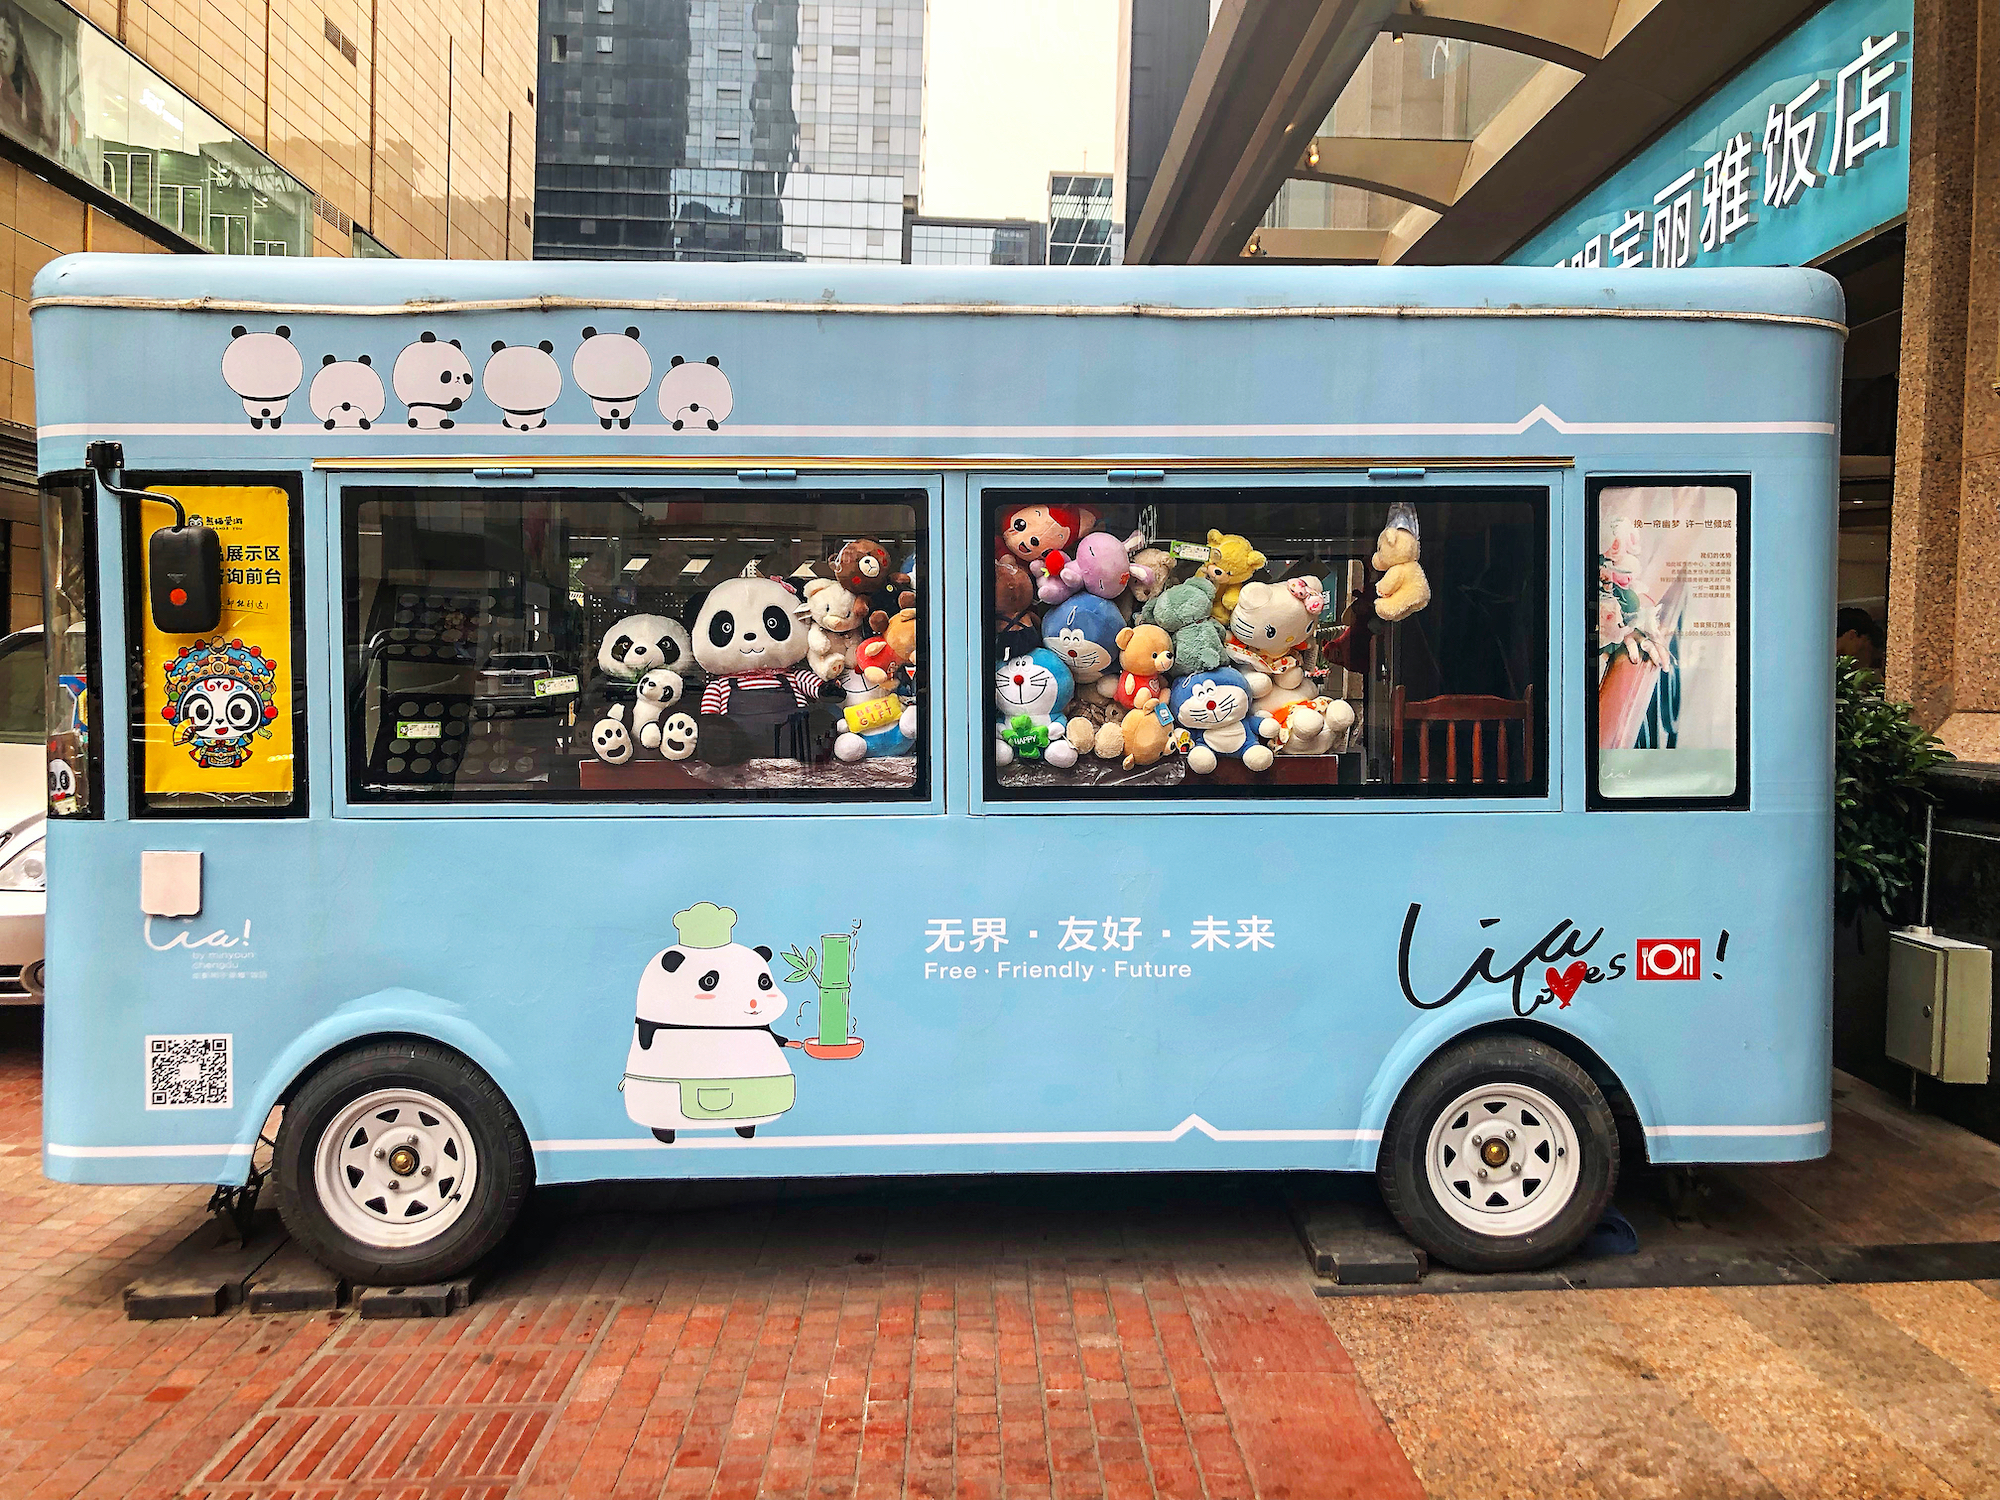 Bus Outside the Lia Hotel in Chengdu Filled with Panda Toys and Images